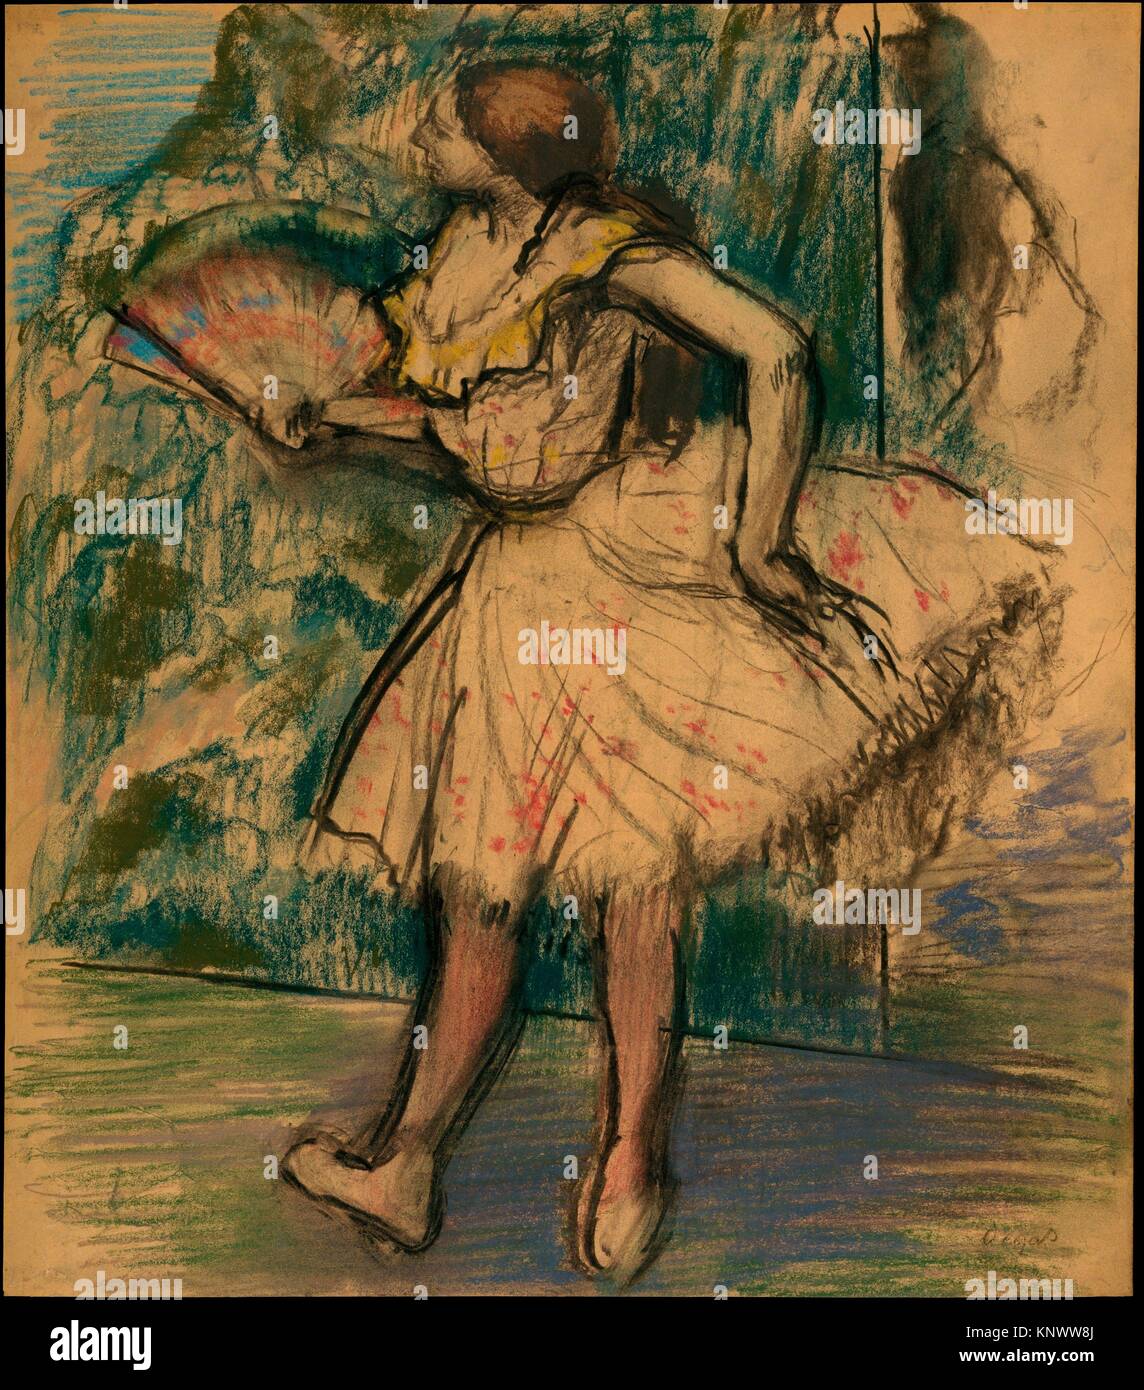 Dancer with a Fan. Artist: Edgar Degas (French, Paris 1834-1917 Paris);  Date: ca. 1890-95; Medium: Pastel and charcoal on buff-colored wove tracing  Stock Photo - Alamy